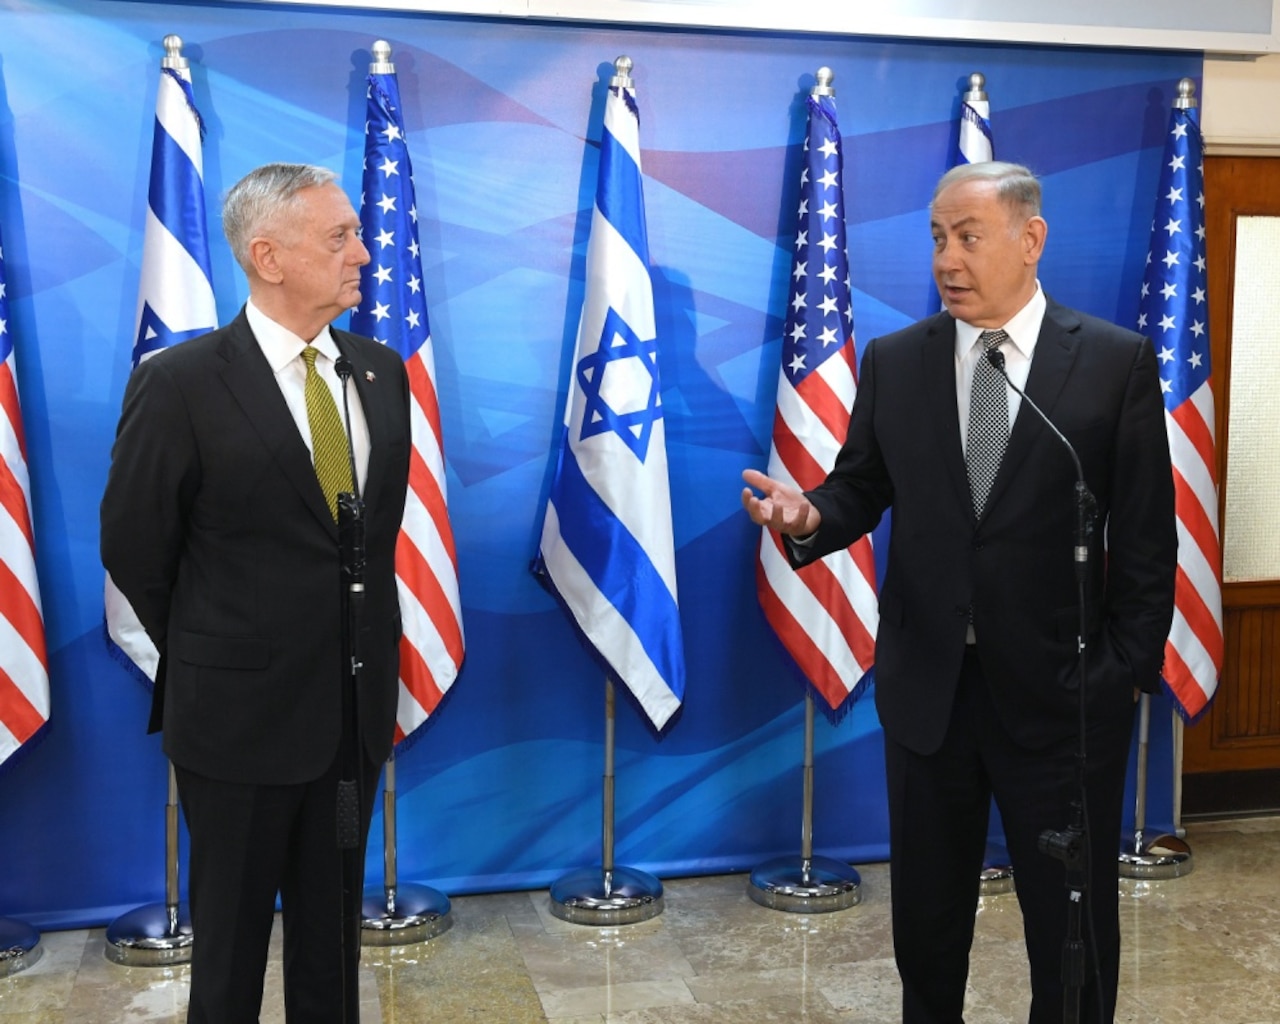 Defense Secretary Jim Mattis, who arrived in Israel April 20, was received by a full honor guard of Israeli soldiers at the Ministry of Defense and military headquarters in Tel Aviv, Israel, April 21, 2017. Mattis met with Israeli Defense Minister Avigdor Lieberman and other senior officials. Later, Mattis met separately with Israeli Prime Minister Benjamin Netanyahu in Jerusalem, pictured at right. U.S. Embassy Tel Aviv photo by Matty Stern